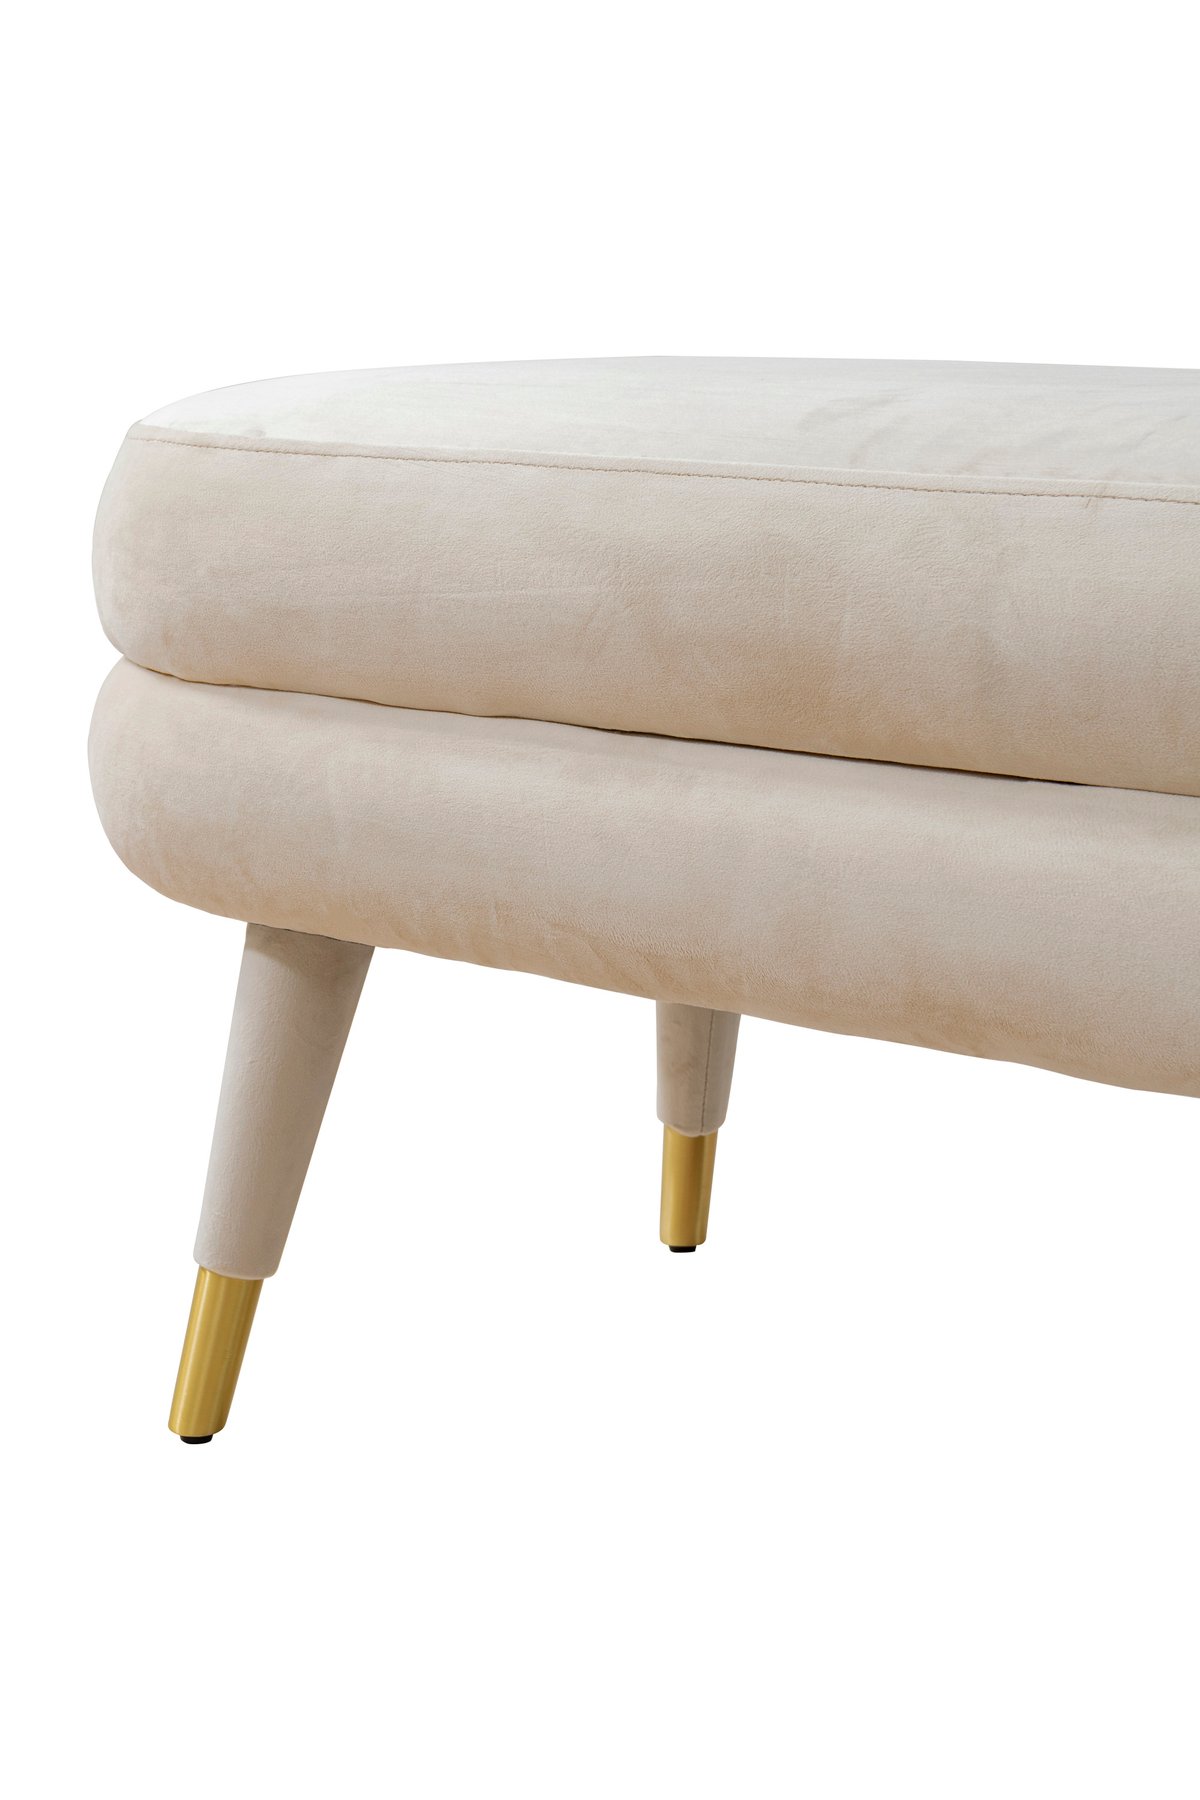 https://images.verishop.com/chic-home-design-lain-bench-plush-velvet-upholstery-tapered-gold-tip-metal-legs-rounded-seat-cushion/M00000000704183-962702586?auto=format&cs=strip&fit=max&w=1200